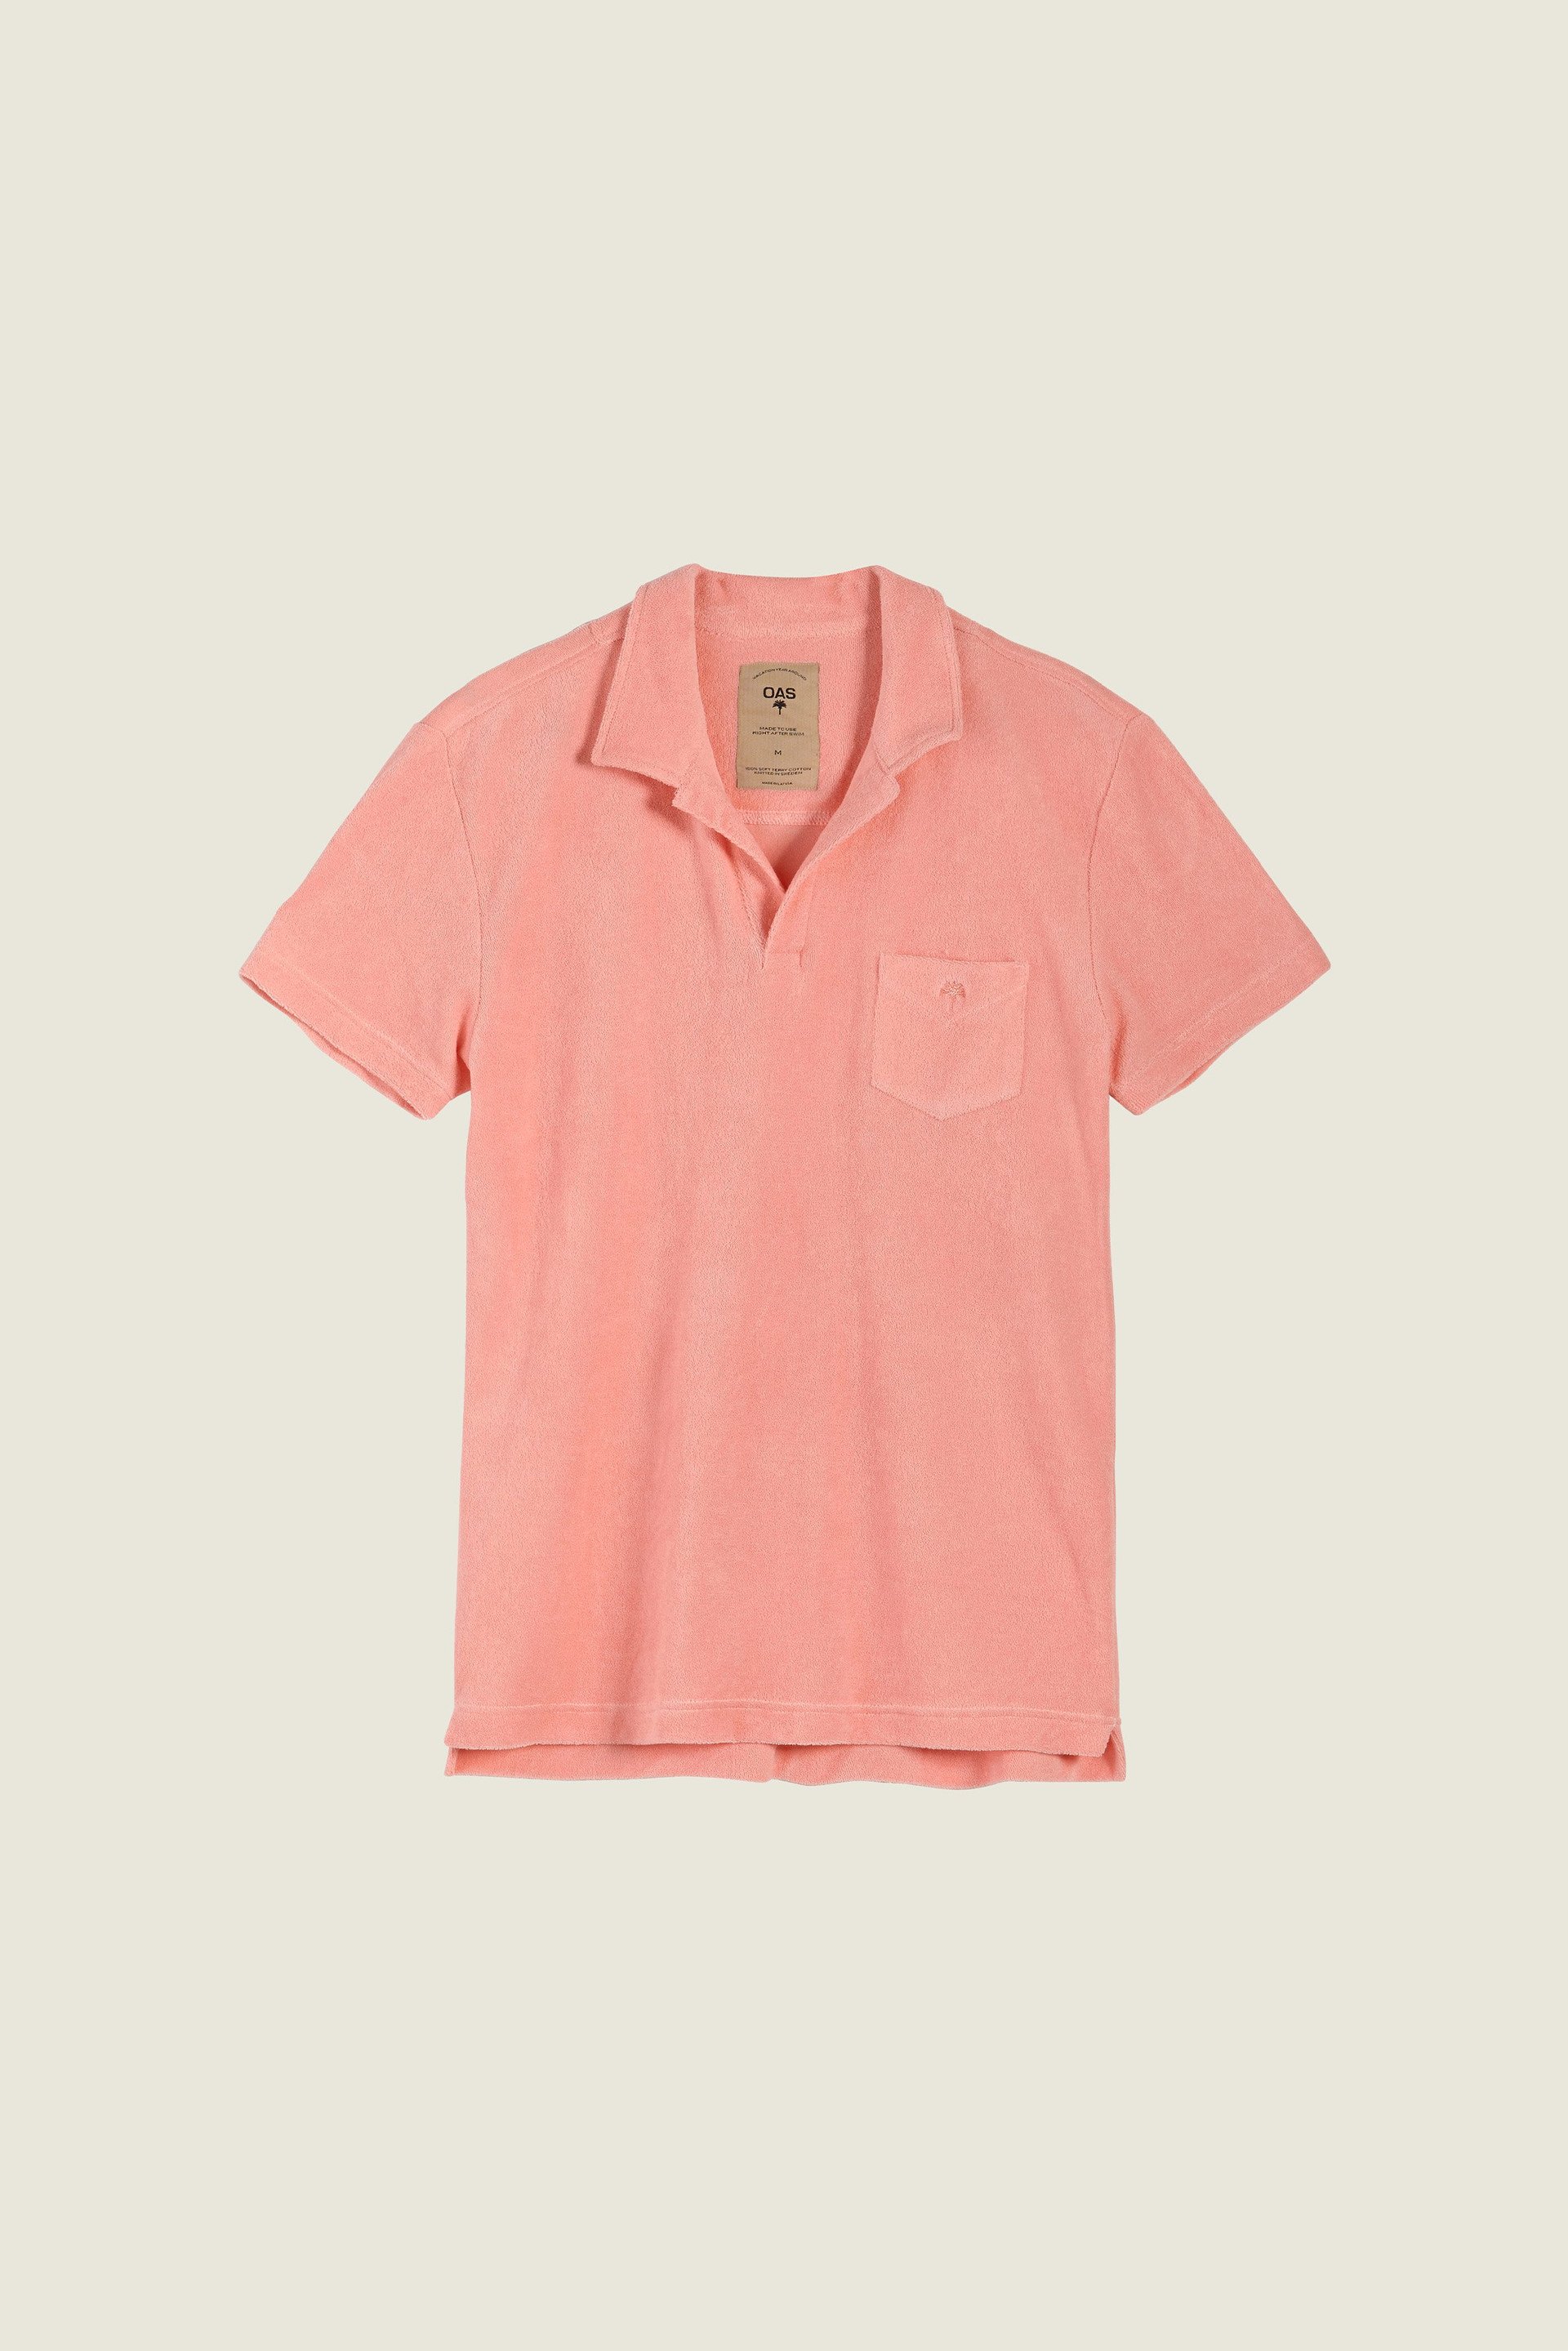 New Pink Polo Terry Shirt